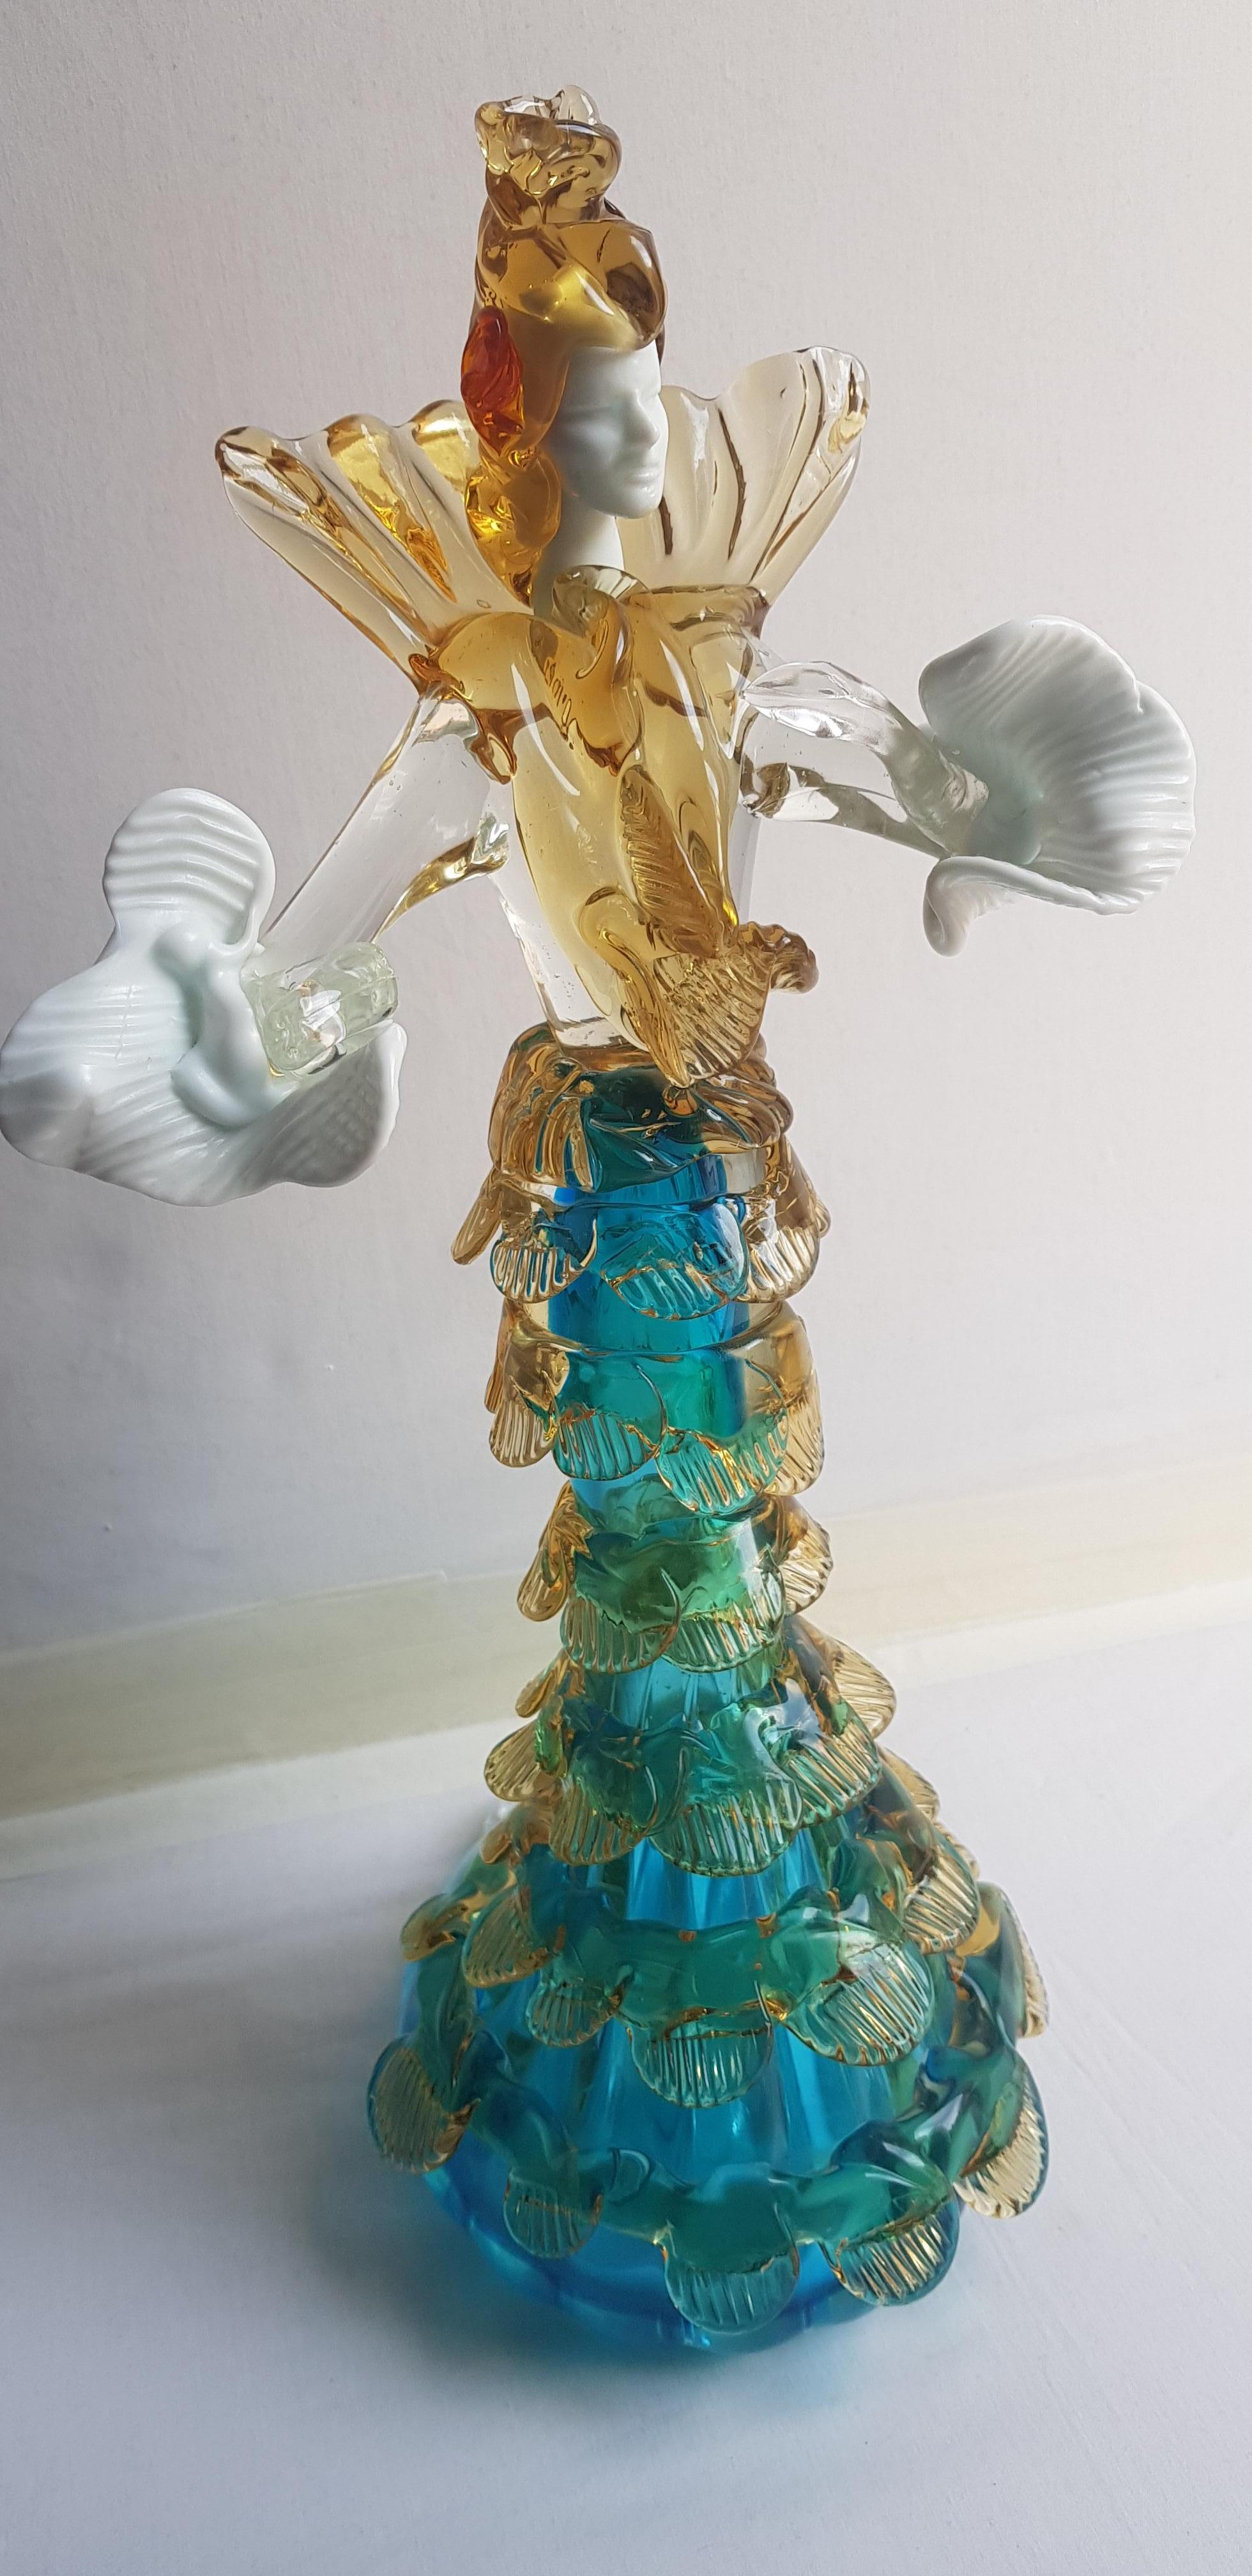 Beautiful Murano glass flamenco lady sculpture in blue, amber, white and clear signed by the artist Franco Giancarlo Toffolo; years 1960-1970. In excellent condition.